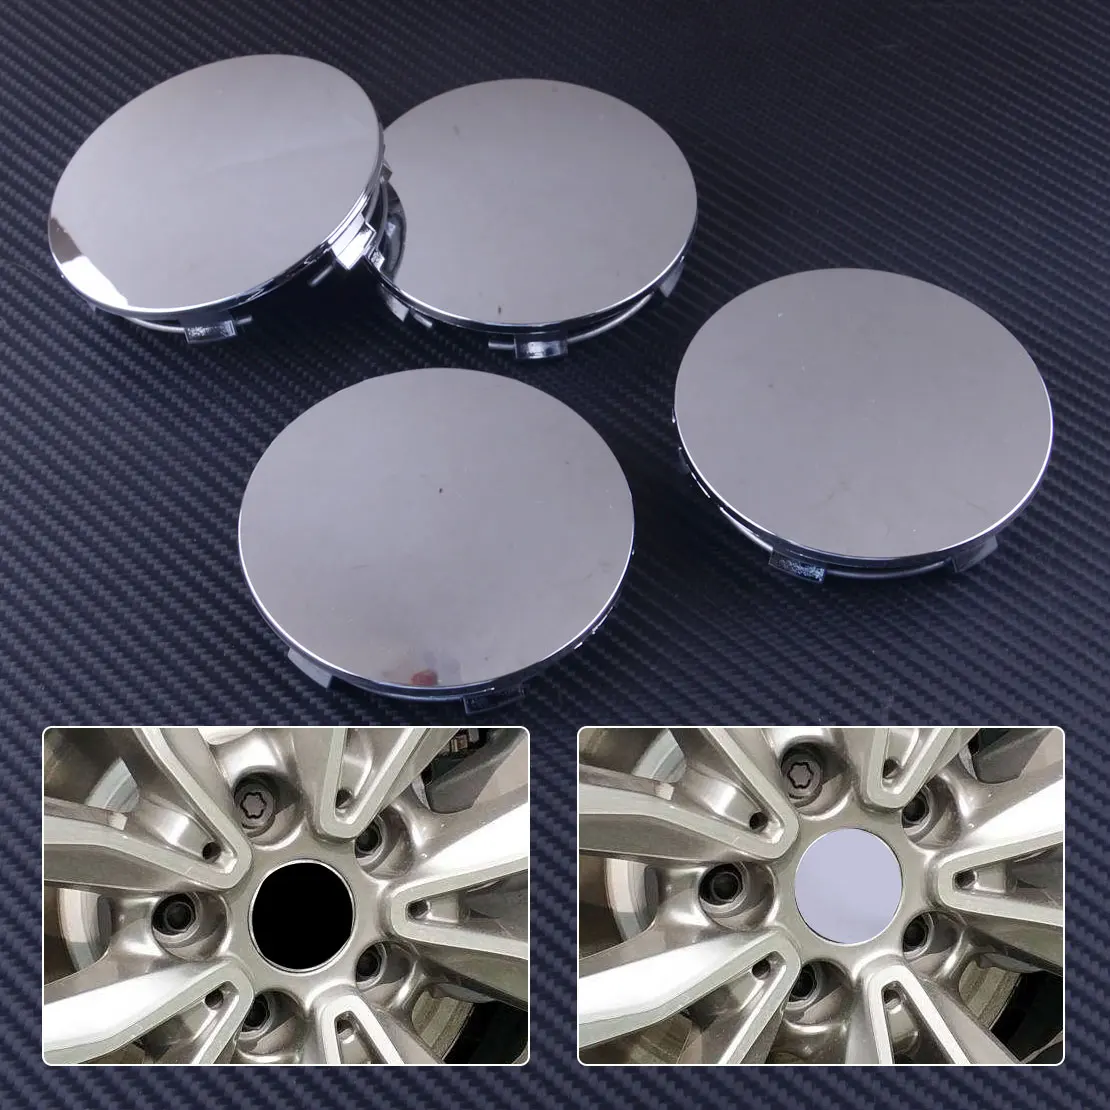 

4pcs 83mm Silver Car ABS Wheel Center Cover Hub Cap Decorative Fit for Chevrolet Avalanche Tahoe